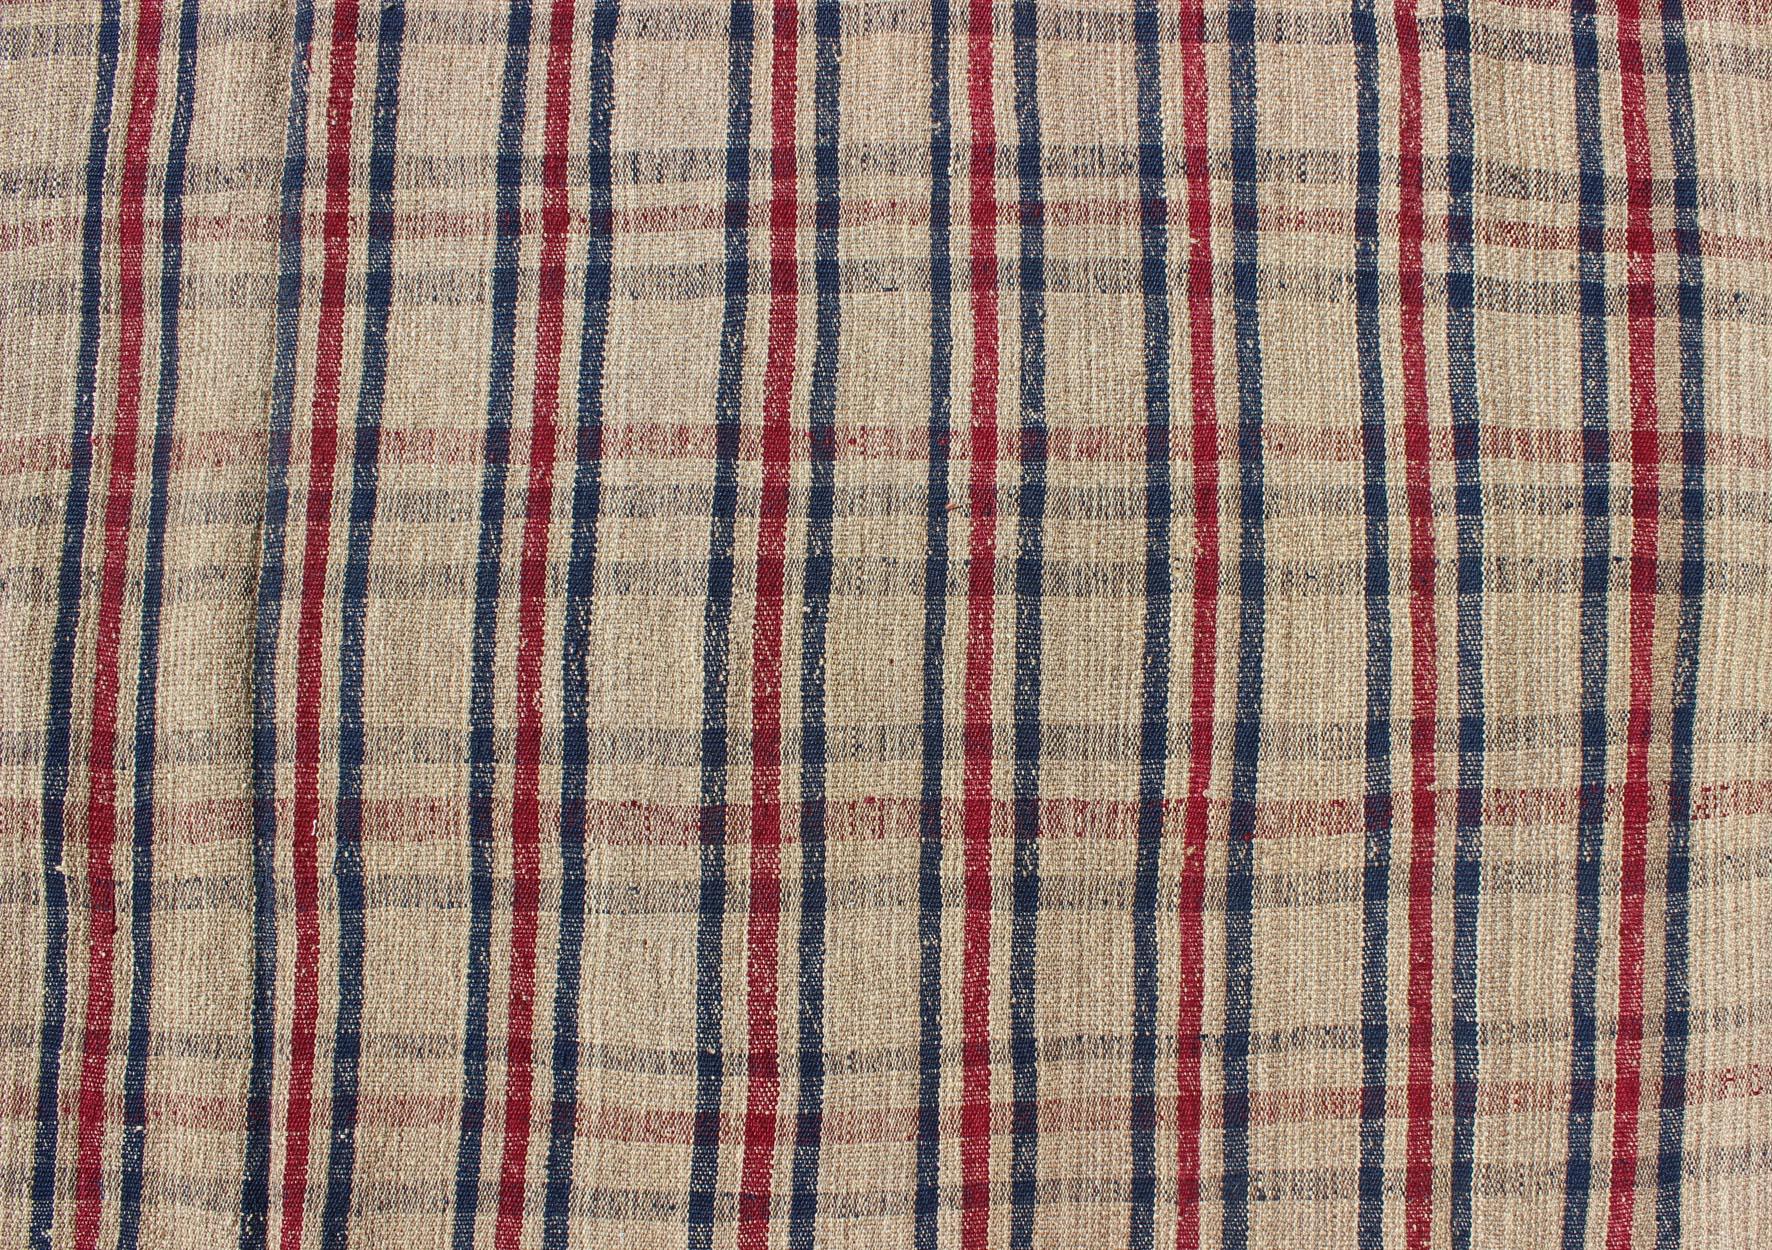 Plaid Design Vintage Turkish Kilim Rug with Stripes in Red, Navy Blue and Cream In Excellent Condition For Sale In Atlanta, GA